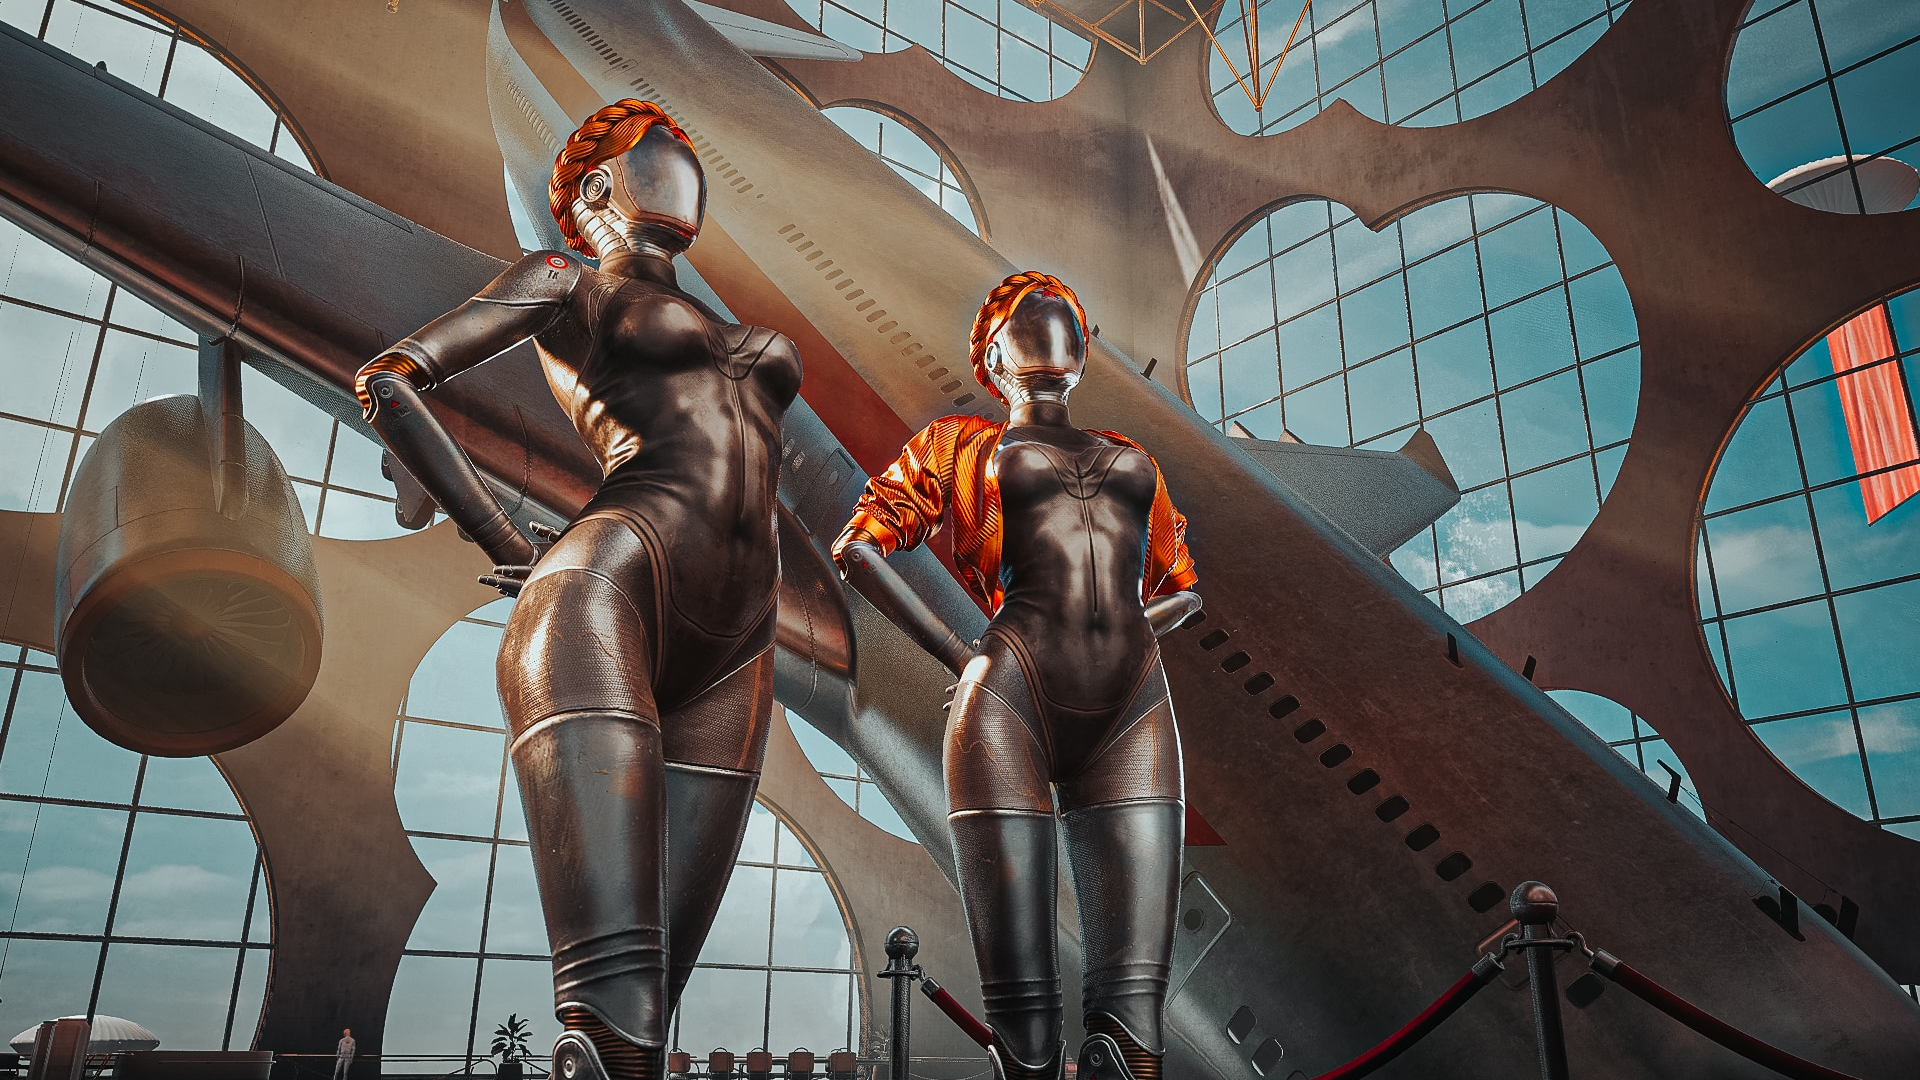 General 1920x1080 Atomic Heart video games video game characters robot cyborg The Twins (Atomic Heart) fictional character Mundfish standing video game art sunlight aircraft airplane faceless tight clothing